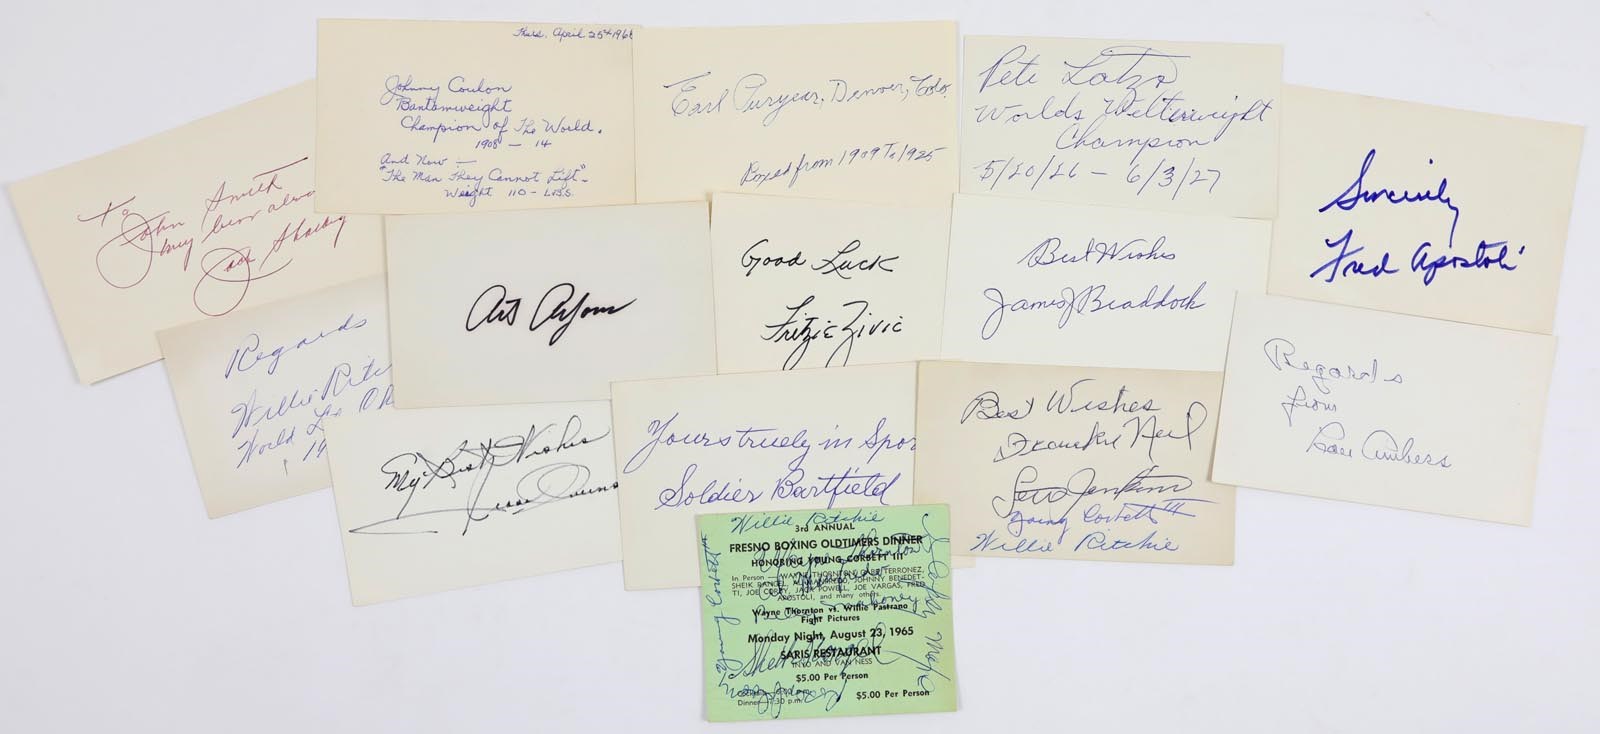 Muhammad Ali & Boxing - Boxing and Jesse Owens Signed 3x5 Cards From Old Time Collector (15+)